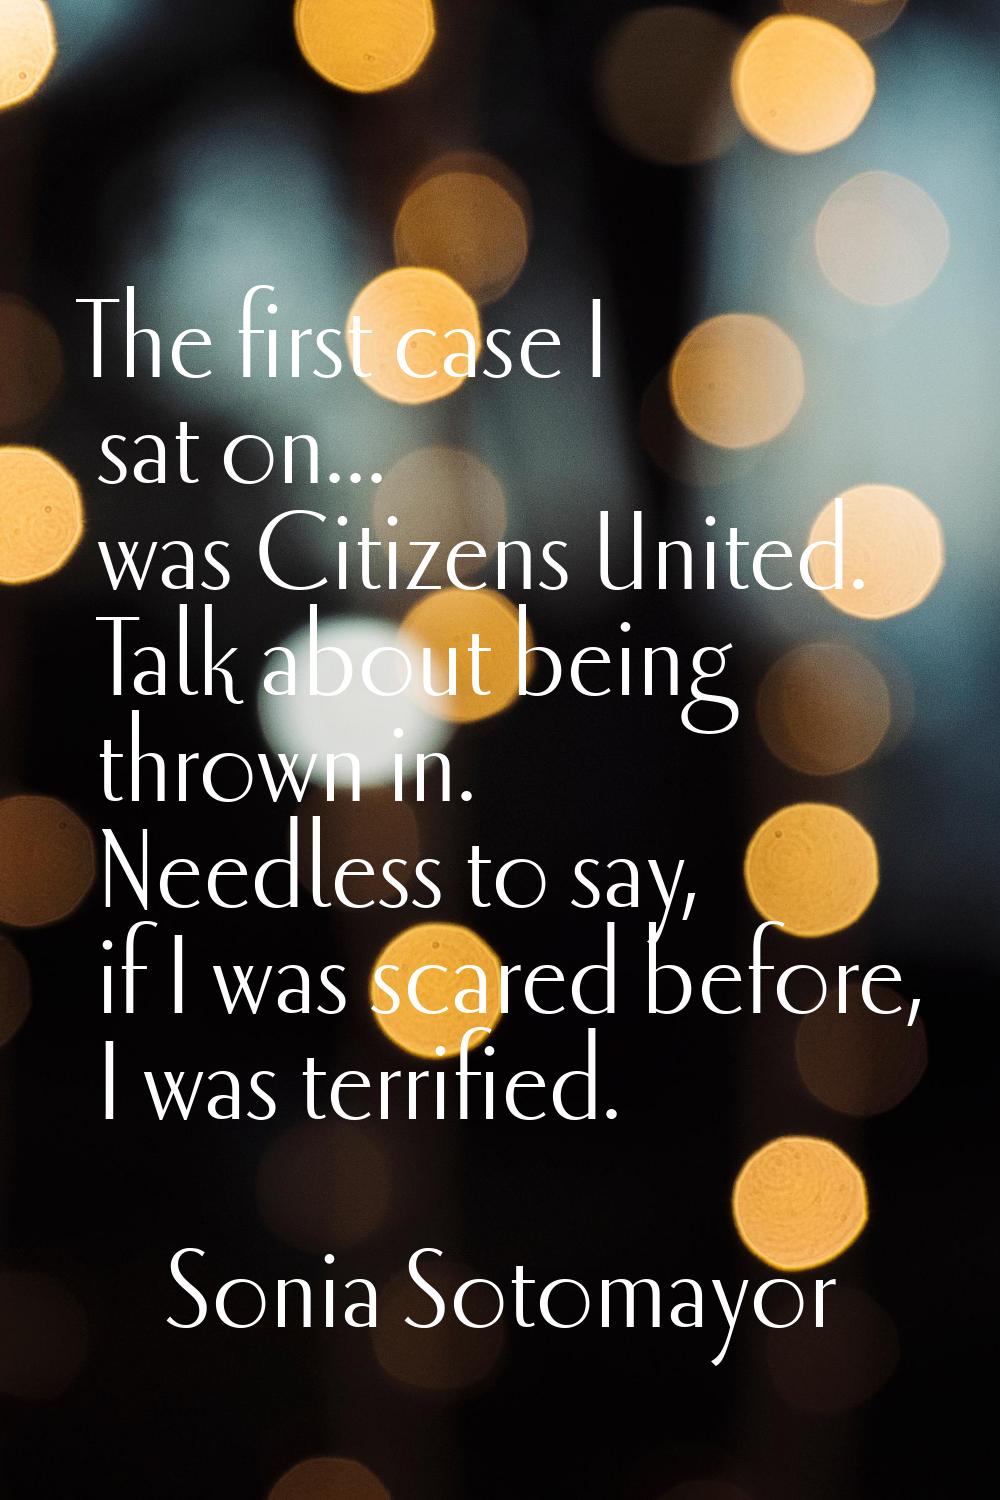 The first case I sat on... was Citizens United. Talk about being thrown in. Needless to say, if I w